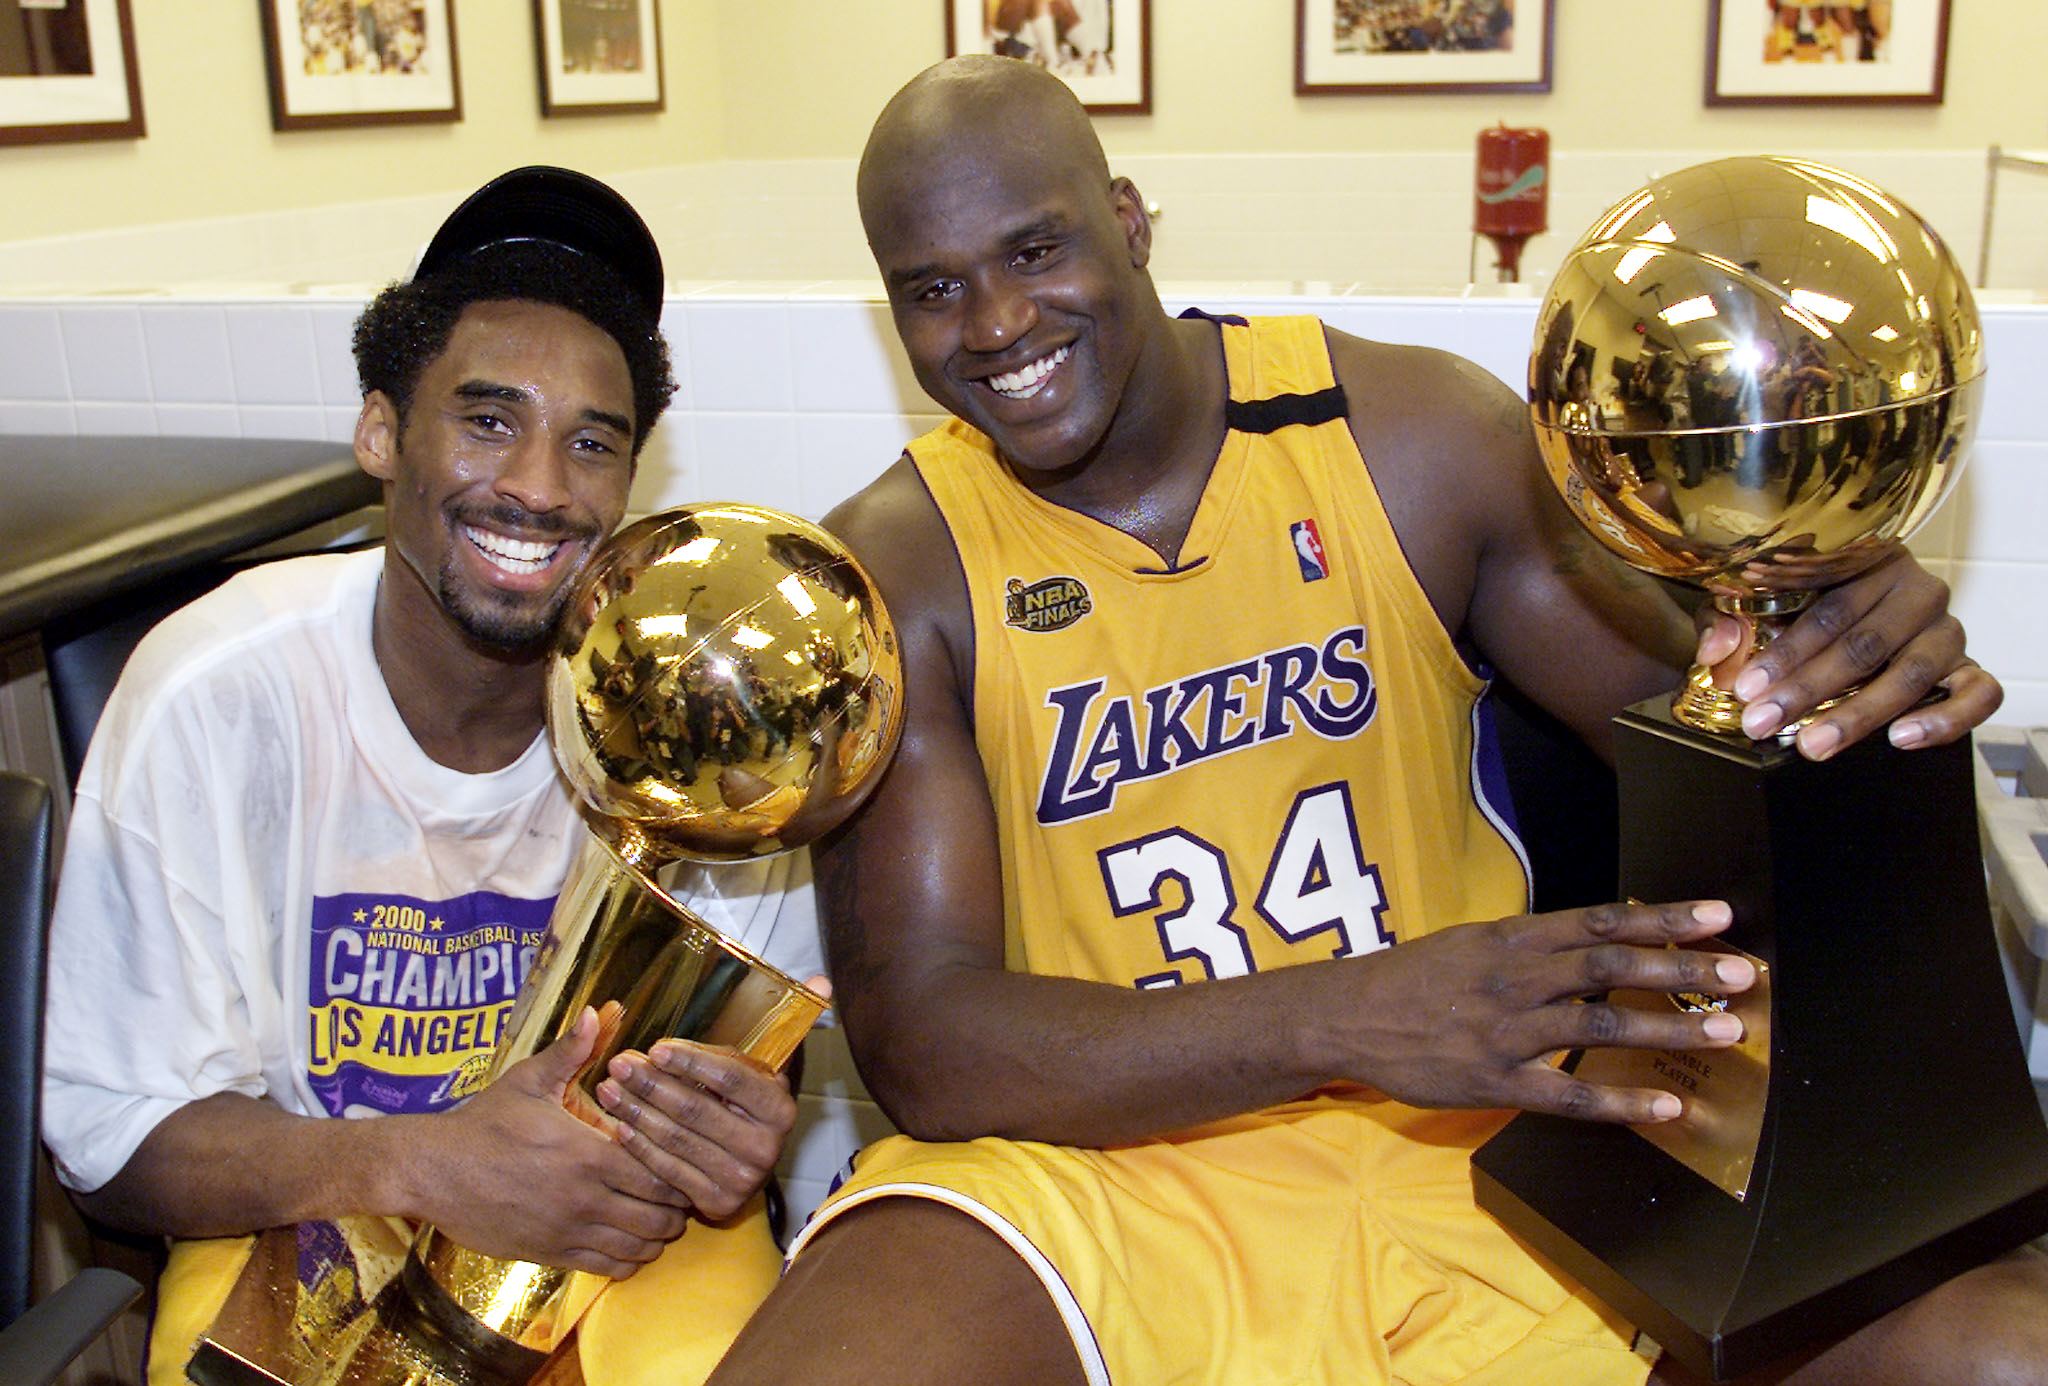 LOS ANGELES, UNITED STATES: Kobe Bryant (L) of the Los Angeles Lakers holds the Larry O'Brian trophy as teammate Shaquille O'Neal (L) hold the MVP trophy after winning the NBA Championship against Indiana Pacers 19 June, 2000, after game six of the NBA Finals at Staples Center in Los Angeles, CA. The Lakers won the game 116-111 to take the NBA title 4-2 in the best-of-seven series. (ELECTRONIC IMAGE) AFP PHOTO (Photo credit should read AFP/AFP/Getty Images)